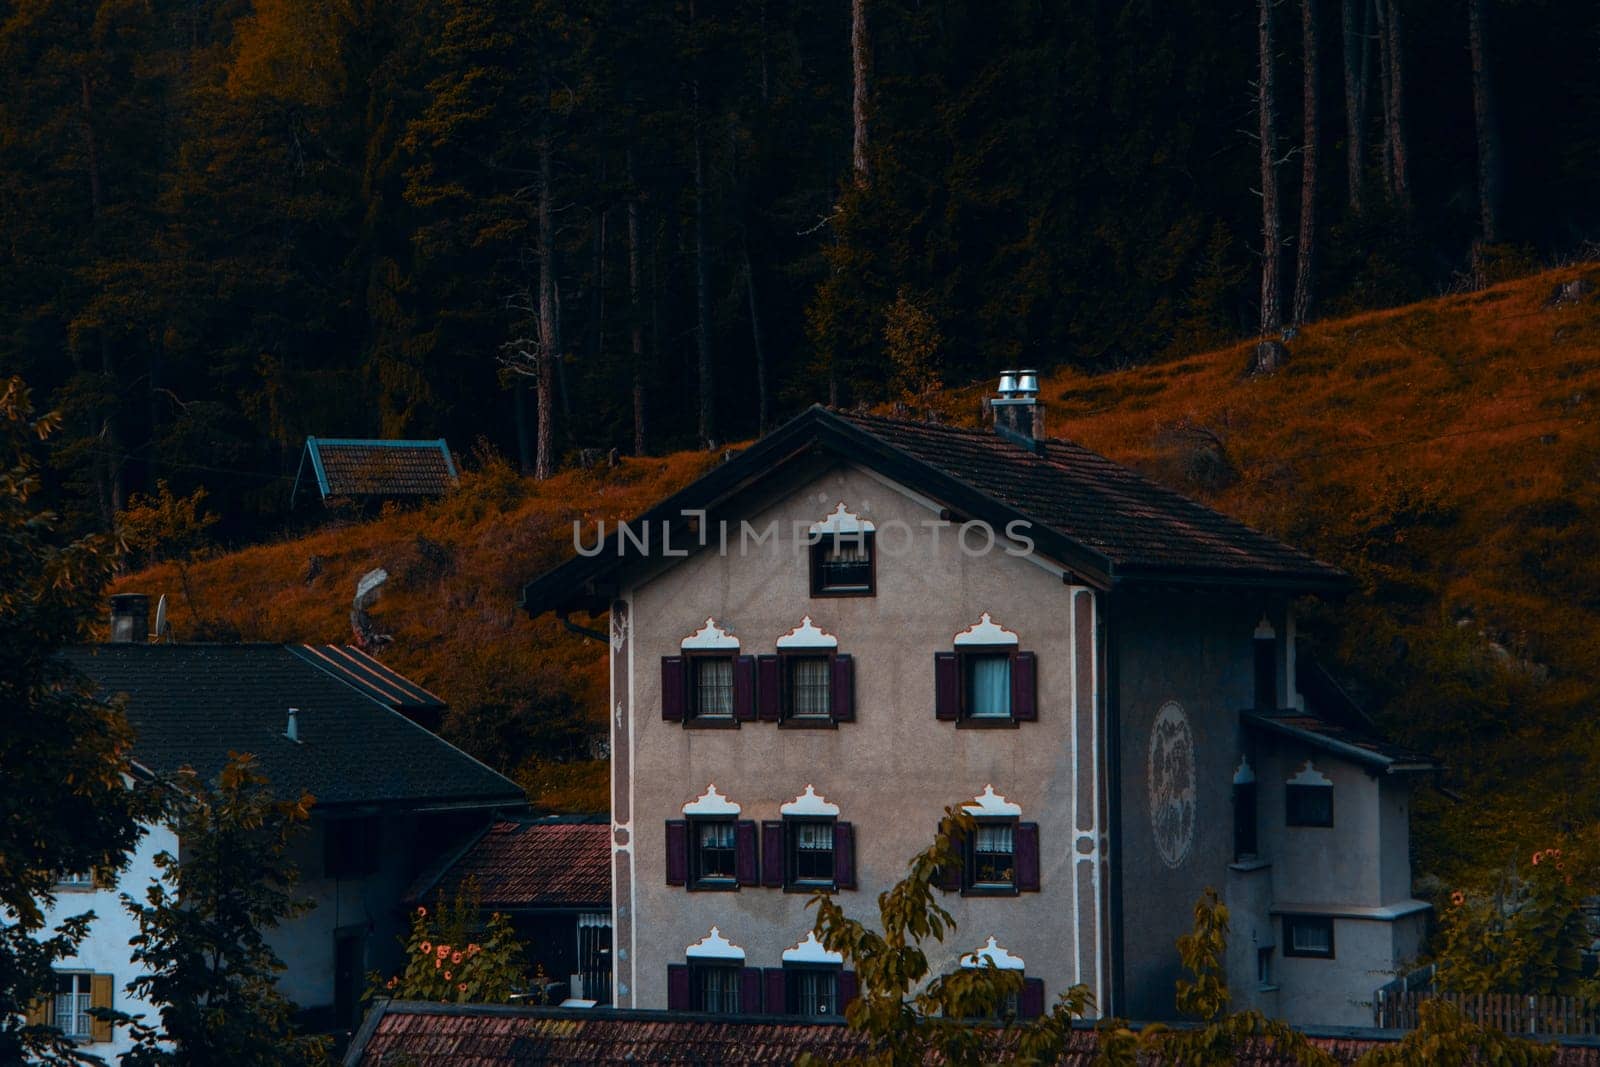 Autumnal Alpine Elegance: A Heritage House Against the Fiery Hues of a Forested Hillside. High quality photo